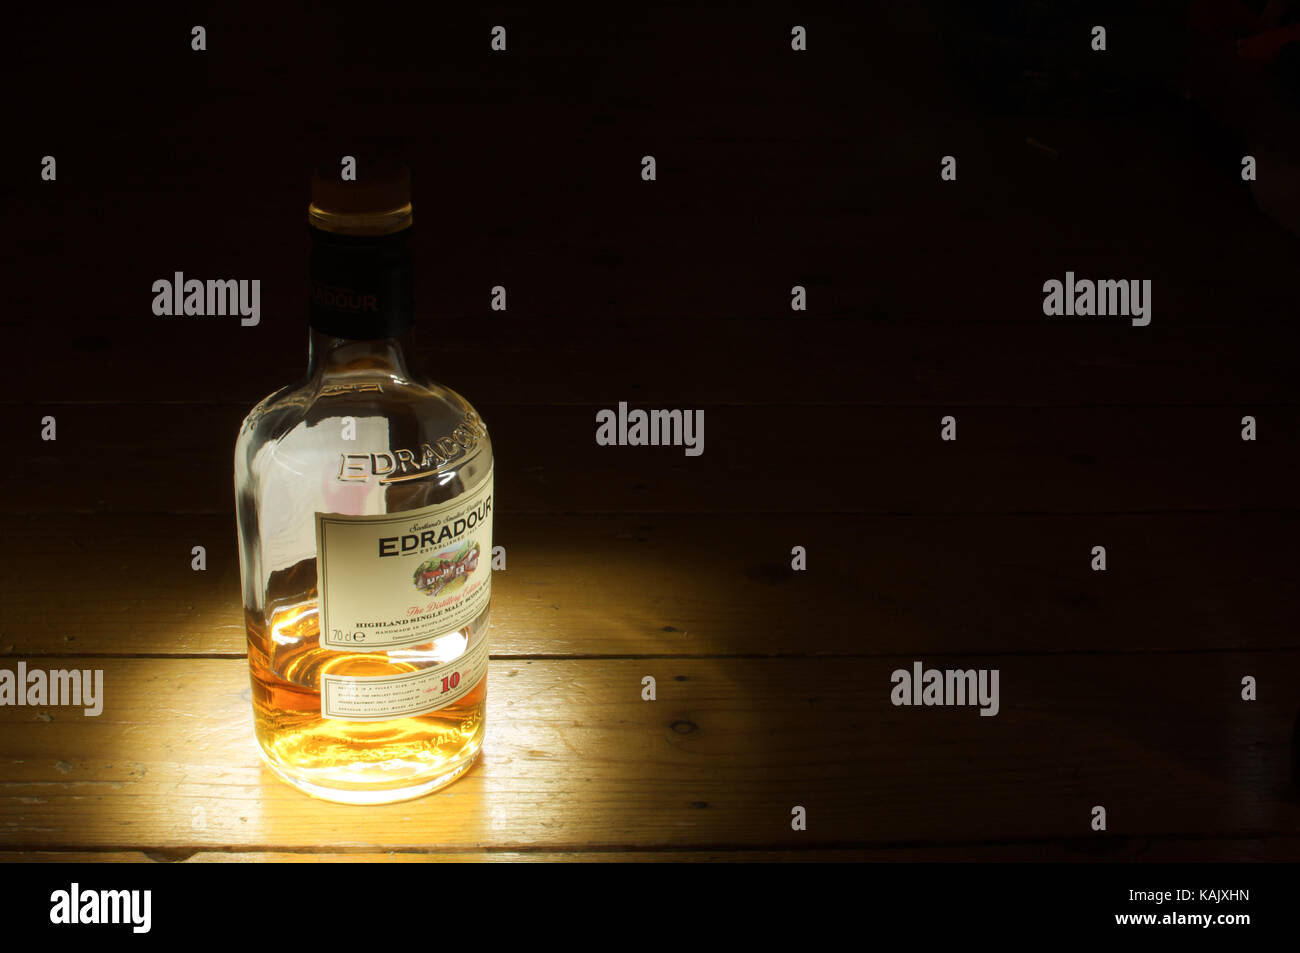 Bottle of Edradour whisky highlighted against a black background Stock Photo